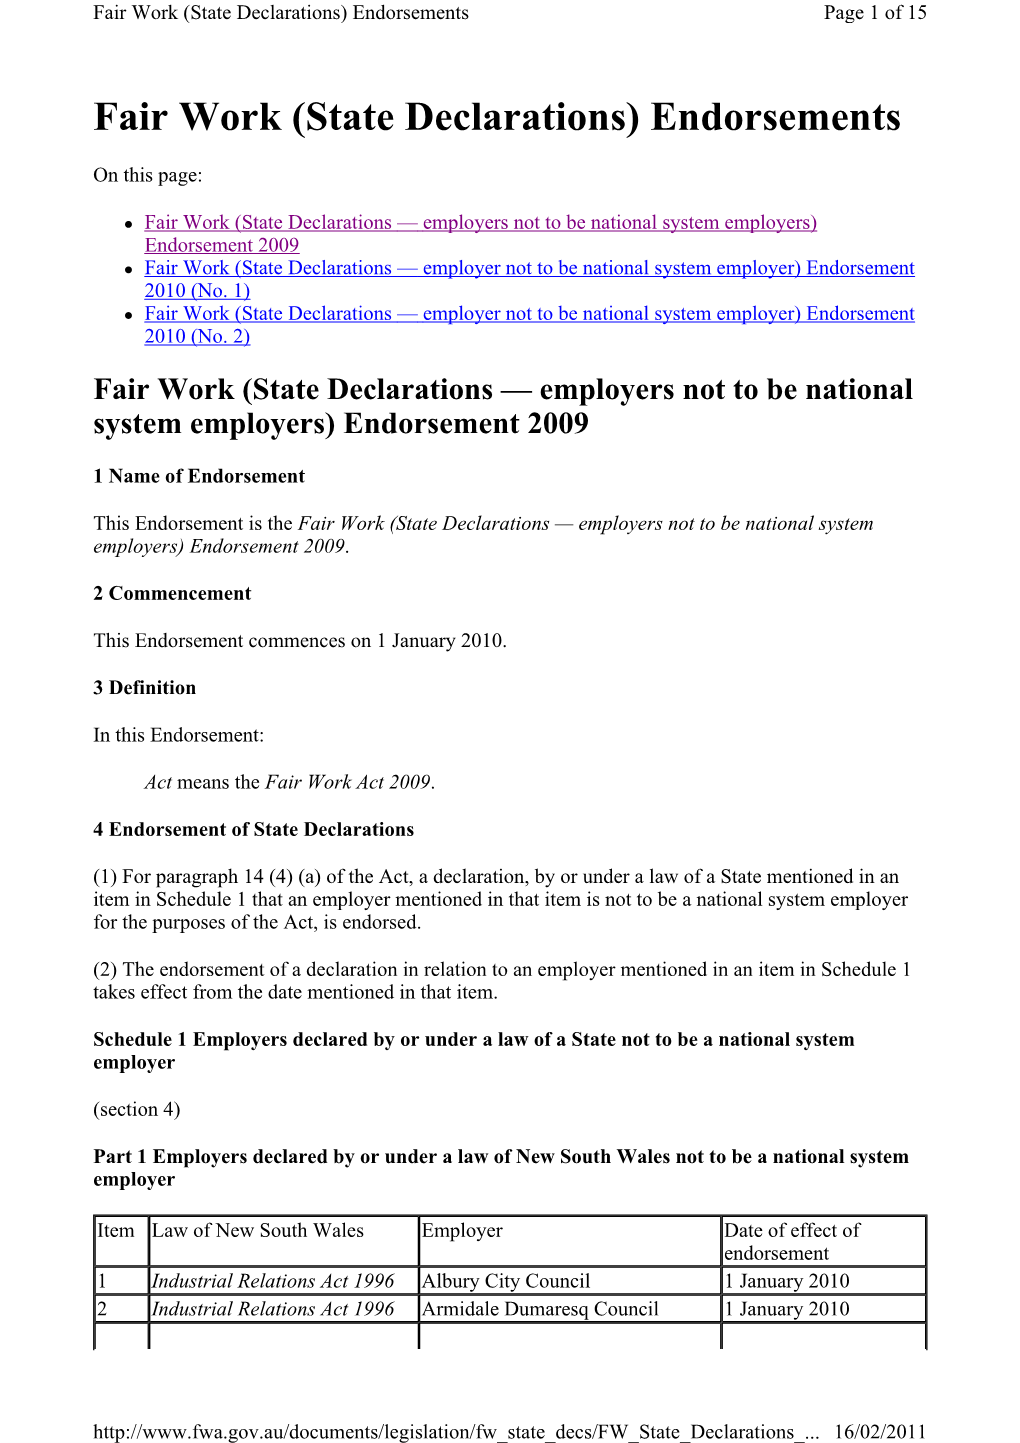 Fair Work (State Declarations) Endorsements Page 1 of 15